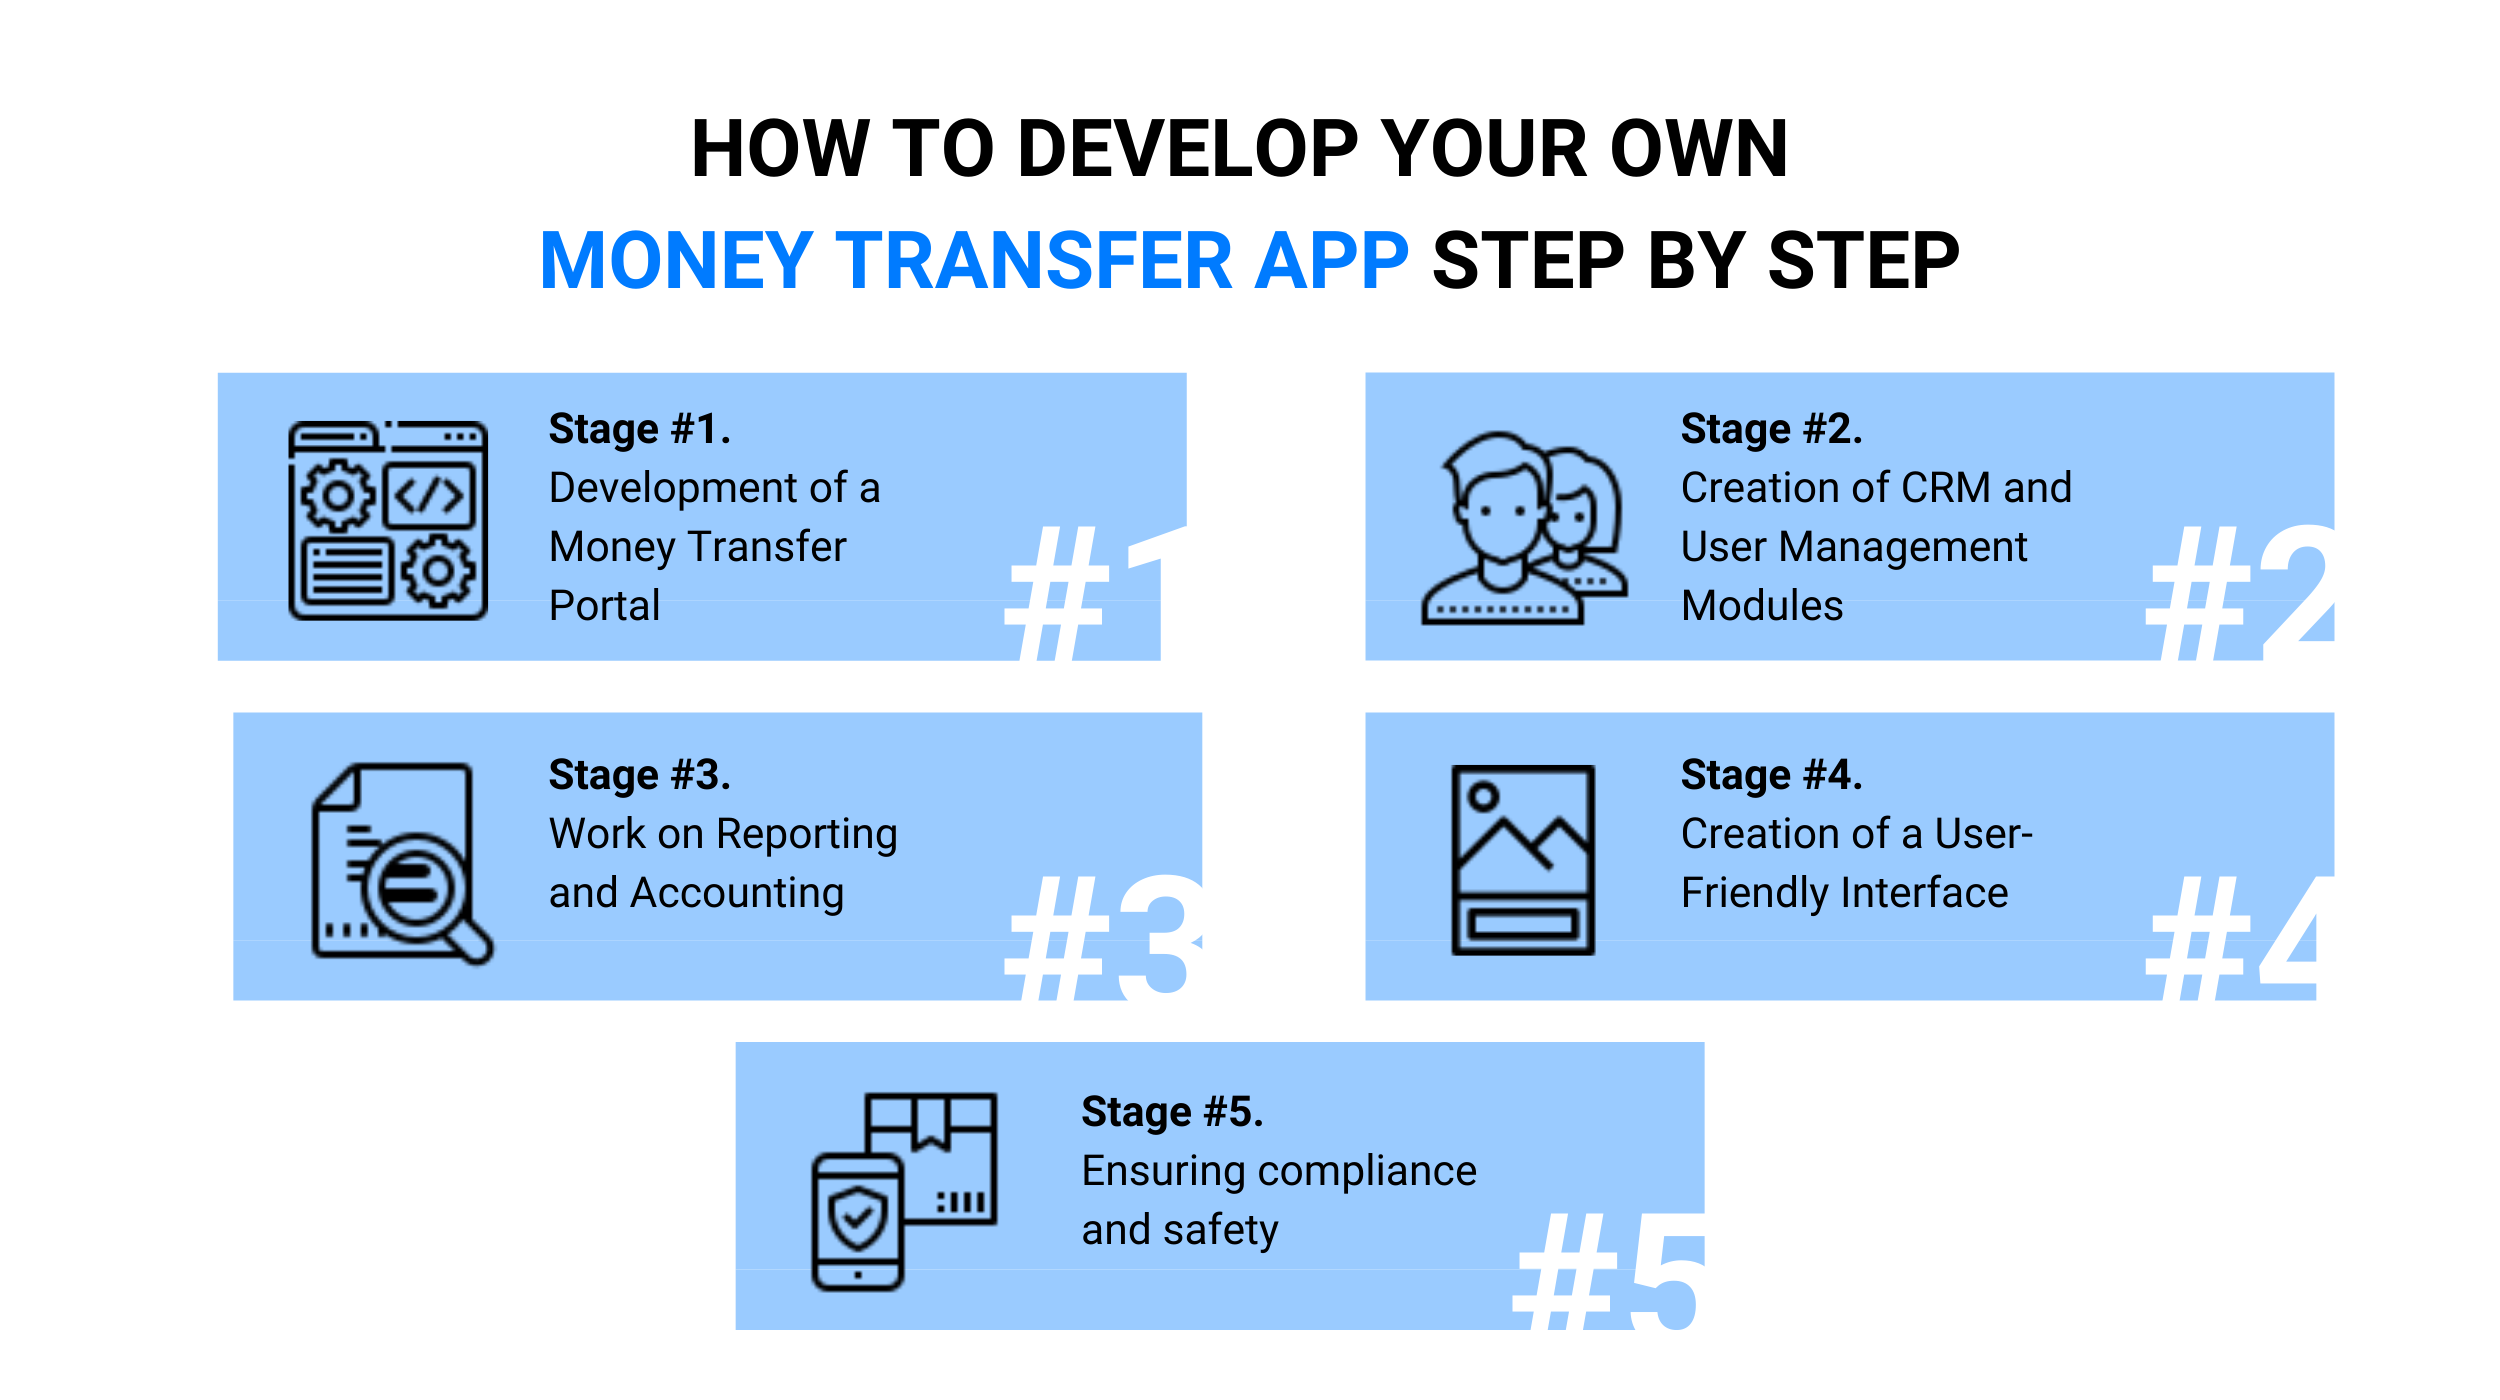 How to Develop Your Own Money Transfer App Step by Step